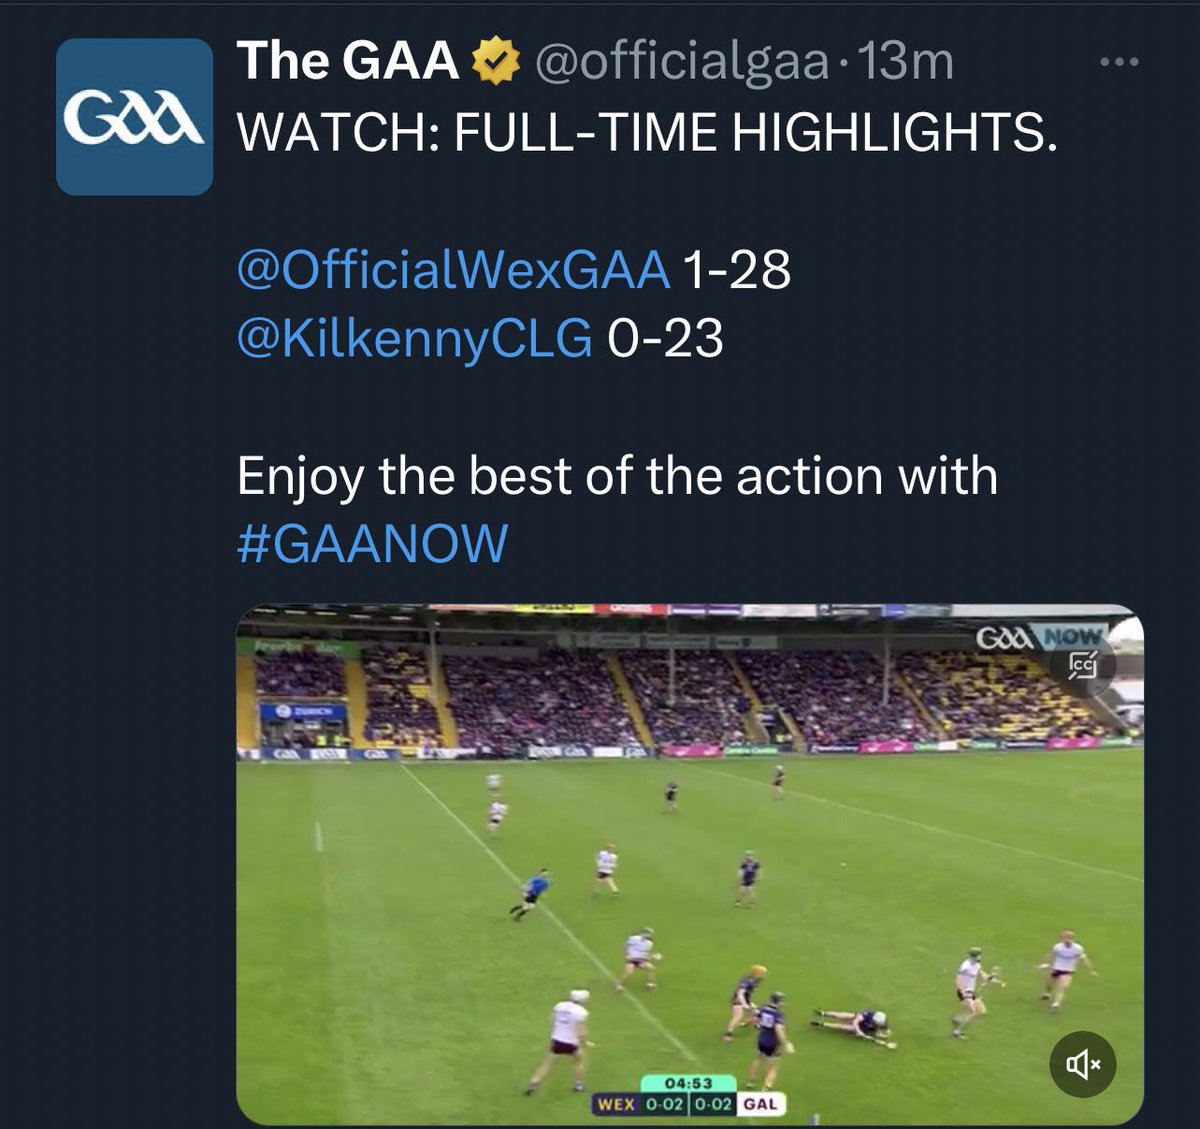 Wexford doing the double, beating Kilkenny and Galway on the same day.